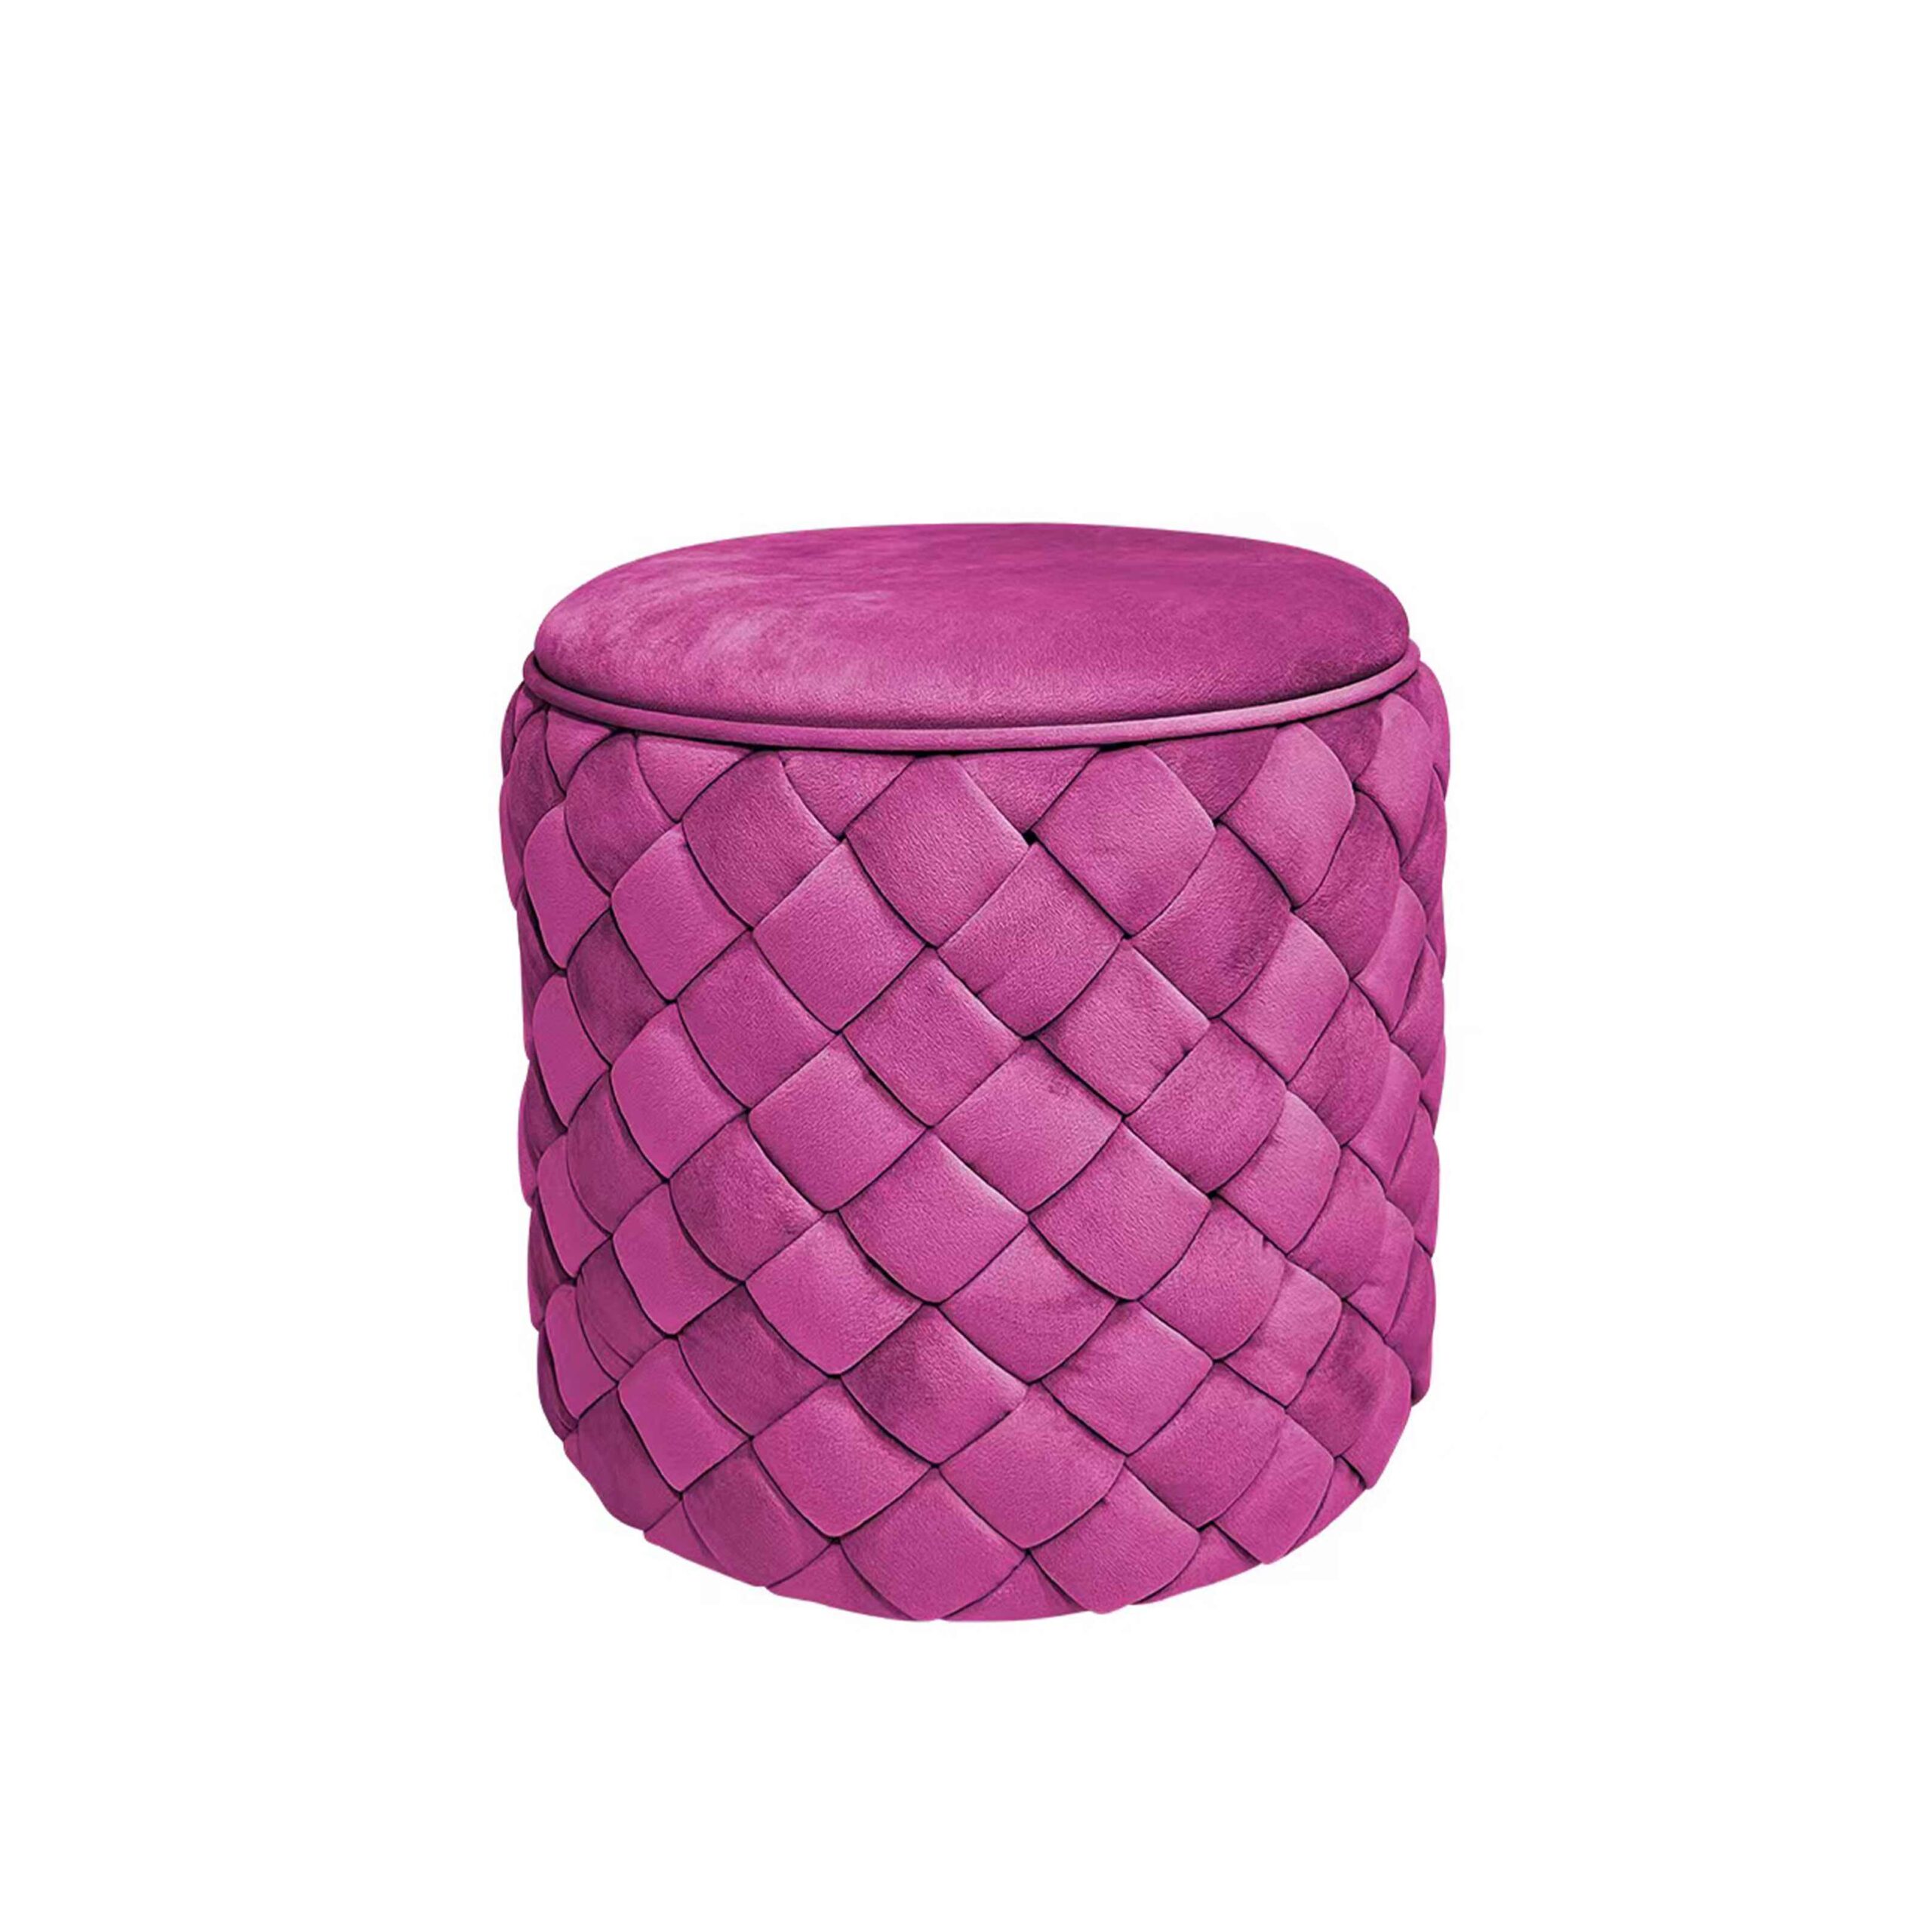 Barbie pink ottoman scaled